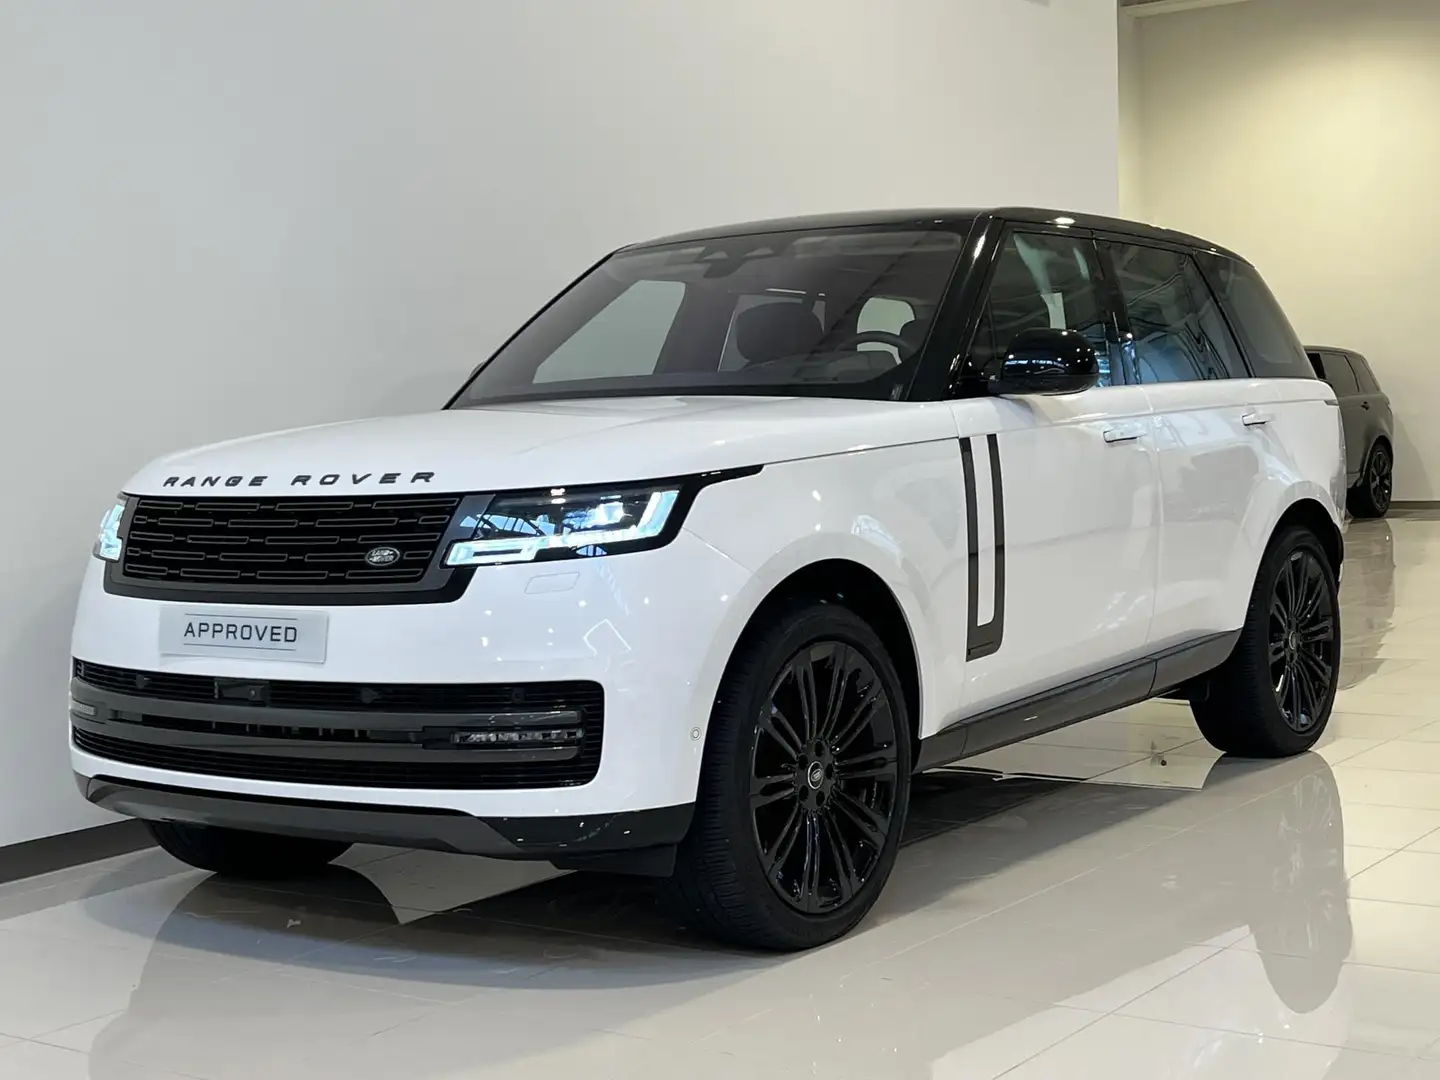 Land Rover Range Rover D350 Autobiography MHEV | 23 inch Gloss Black | Pa Beyaz - 2